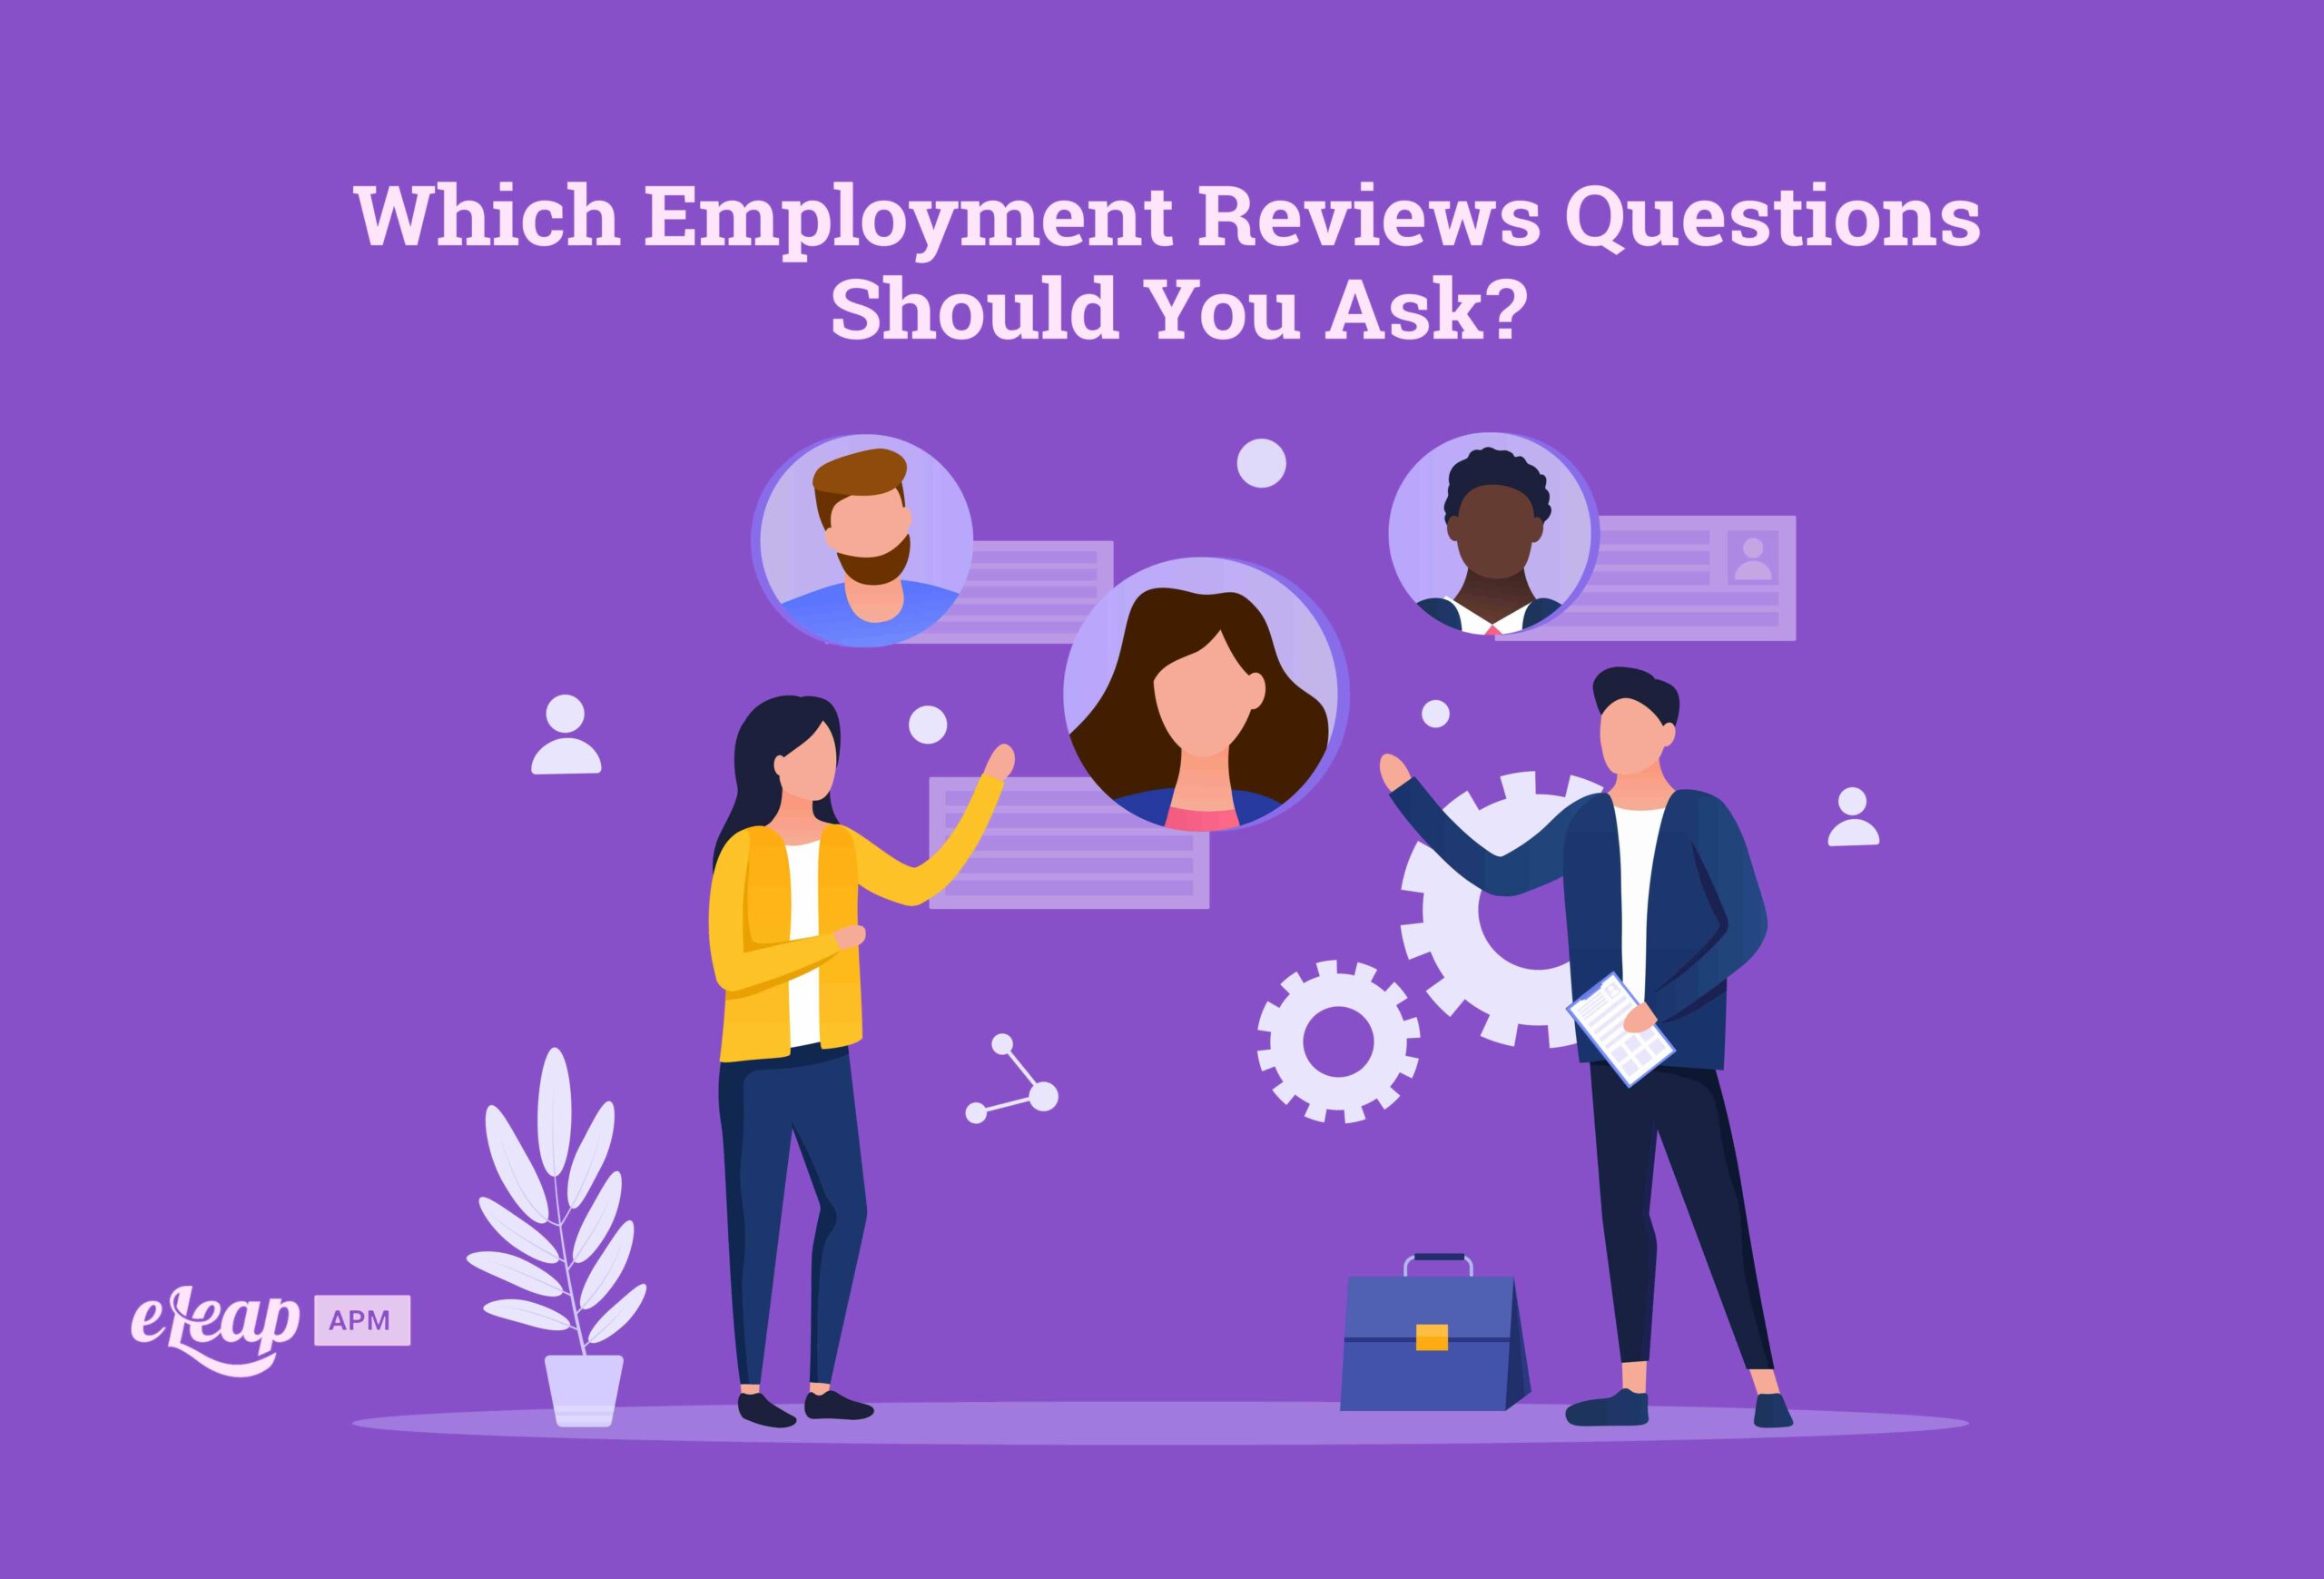 Which Employment Reviews Questions Should You Ask?